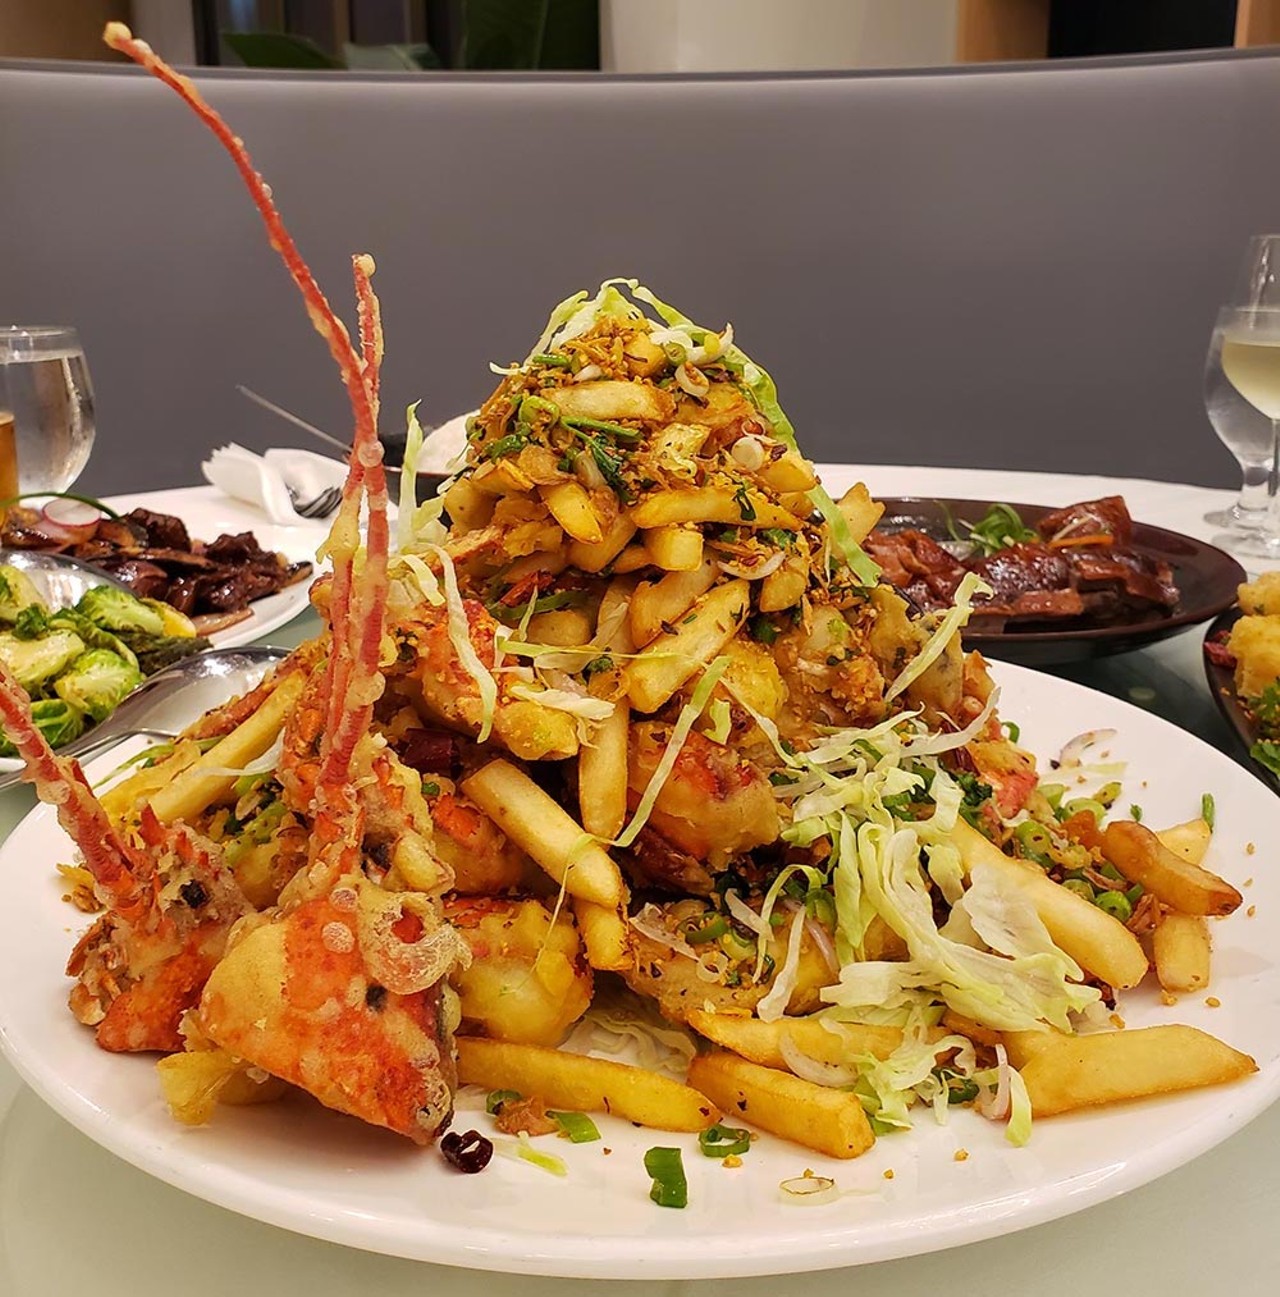 
Seafood tower, YH Seafood Clubhouse
It's truly hard not to salivate over the soaring salvers of seafood proffered at YH, and it's damn near impossible to not genuinely enjoy indulging in a platter of fried lobster piled high with french fries, fried scallions, chilies and garlic.
